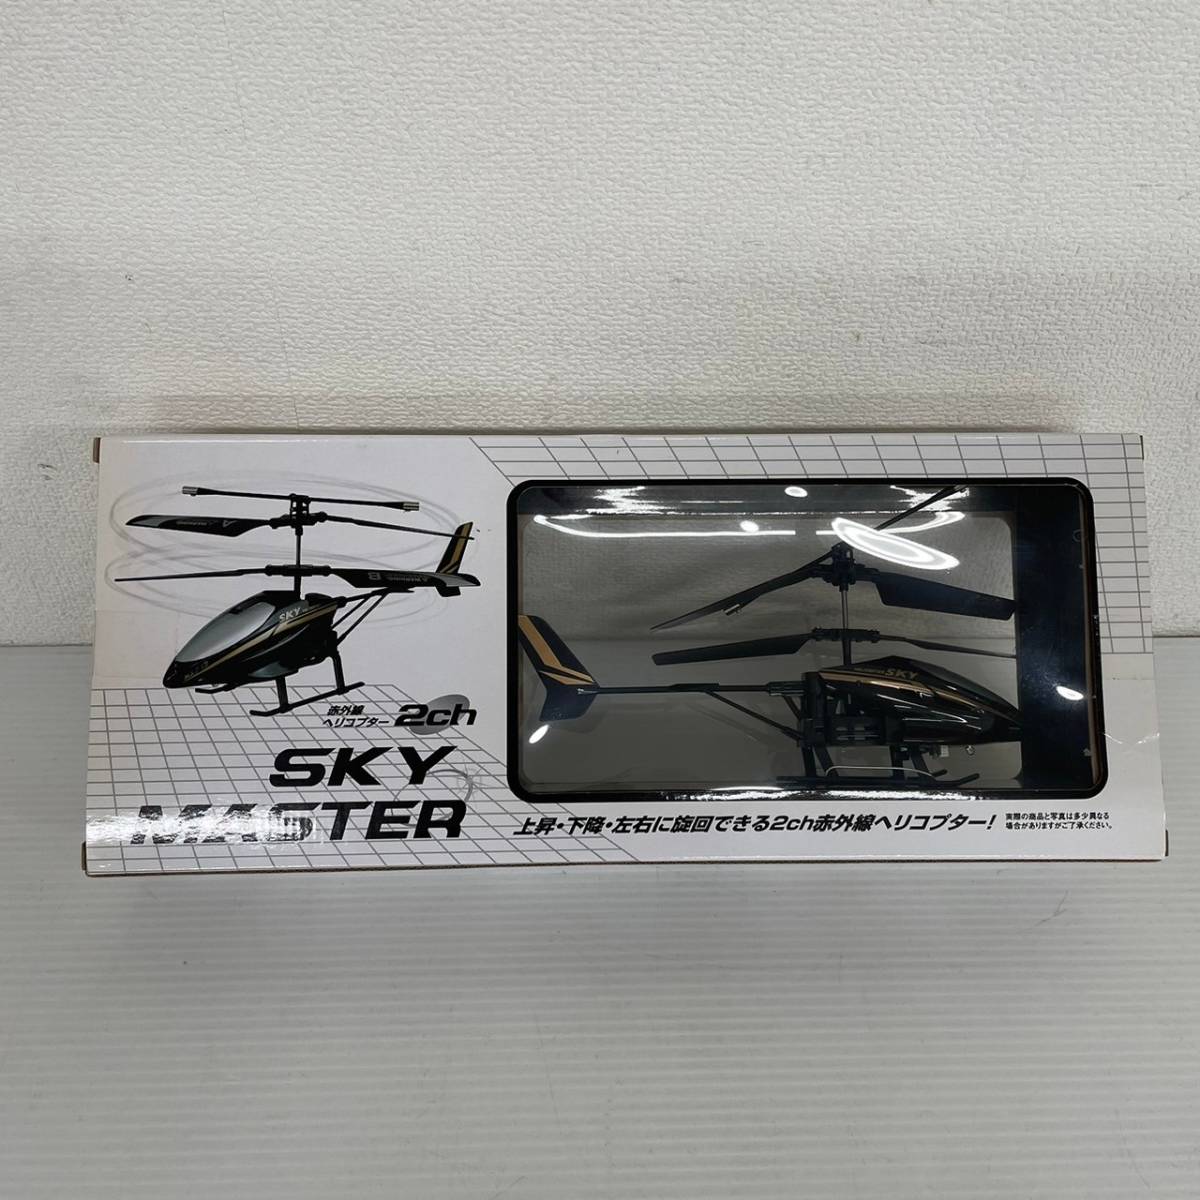  is k infra-red rays radio controller helicopter 2ch 2 channel SKY MASTER Sky master LED light black 